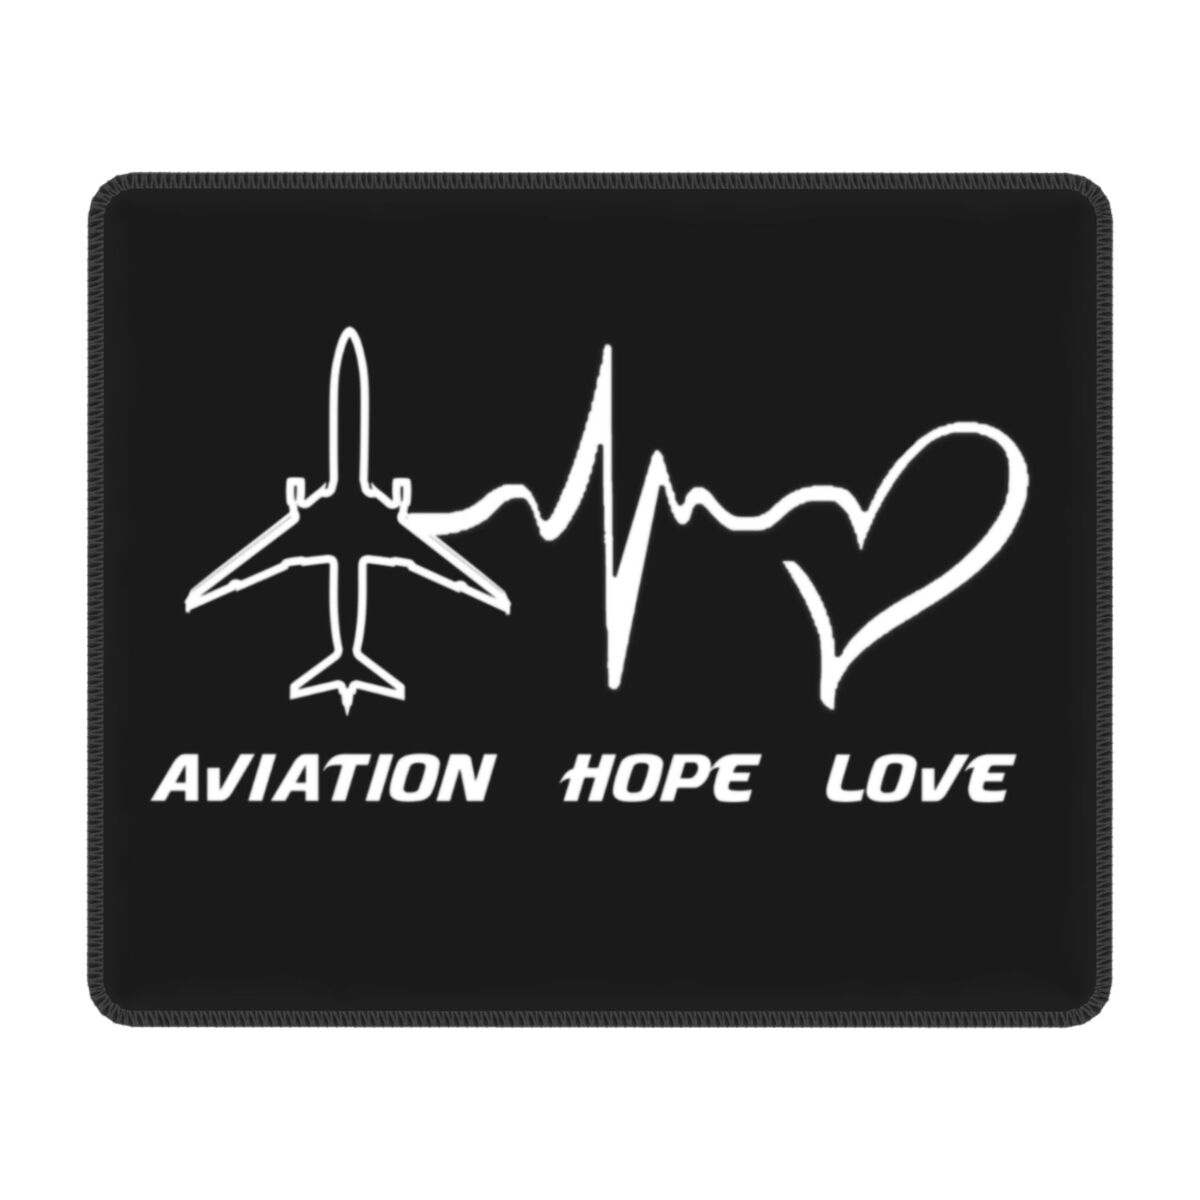 Aviation Hope Love Mouse Pad Gaming Mousepad Anti-Slip Rubber Base Airplane Pilot Aviator Air Fighter Office Desk Computer Mat